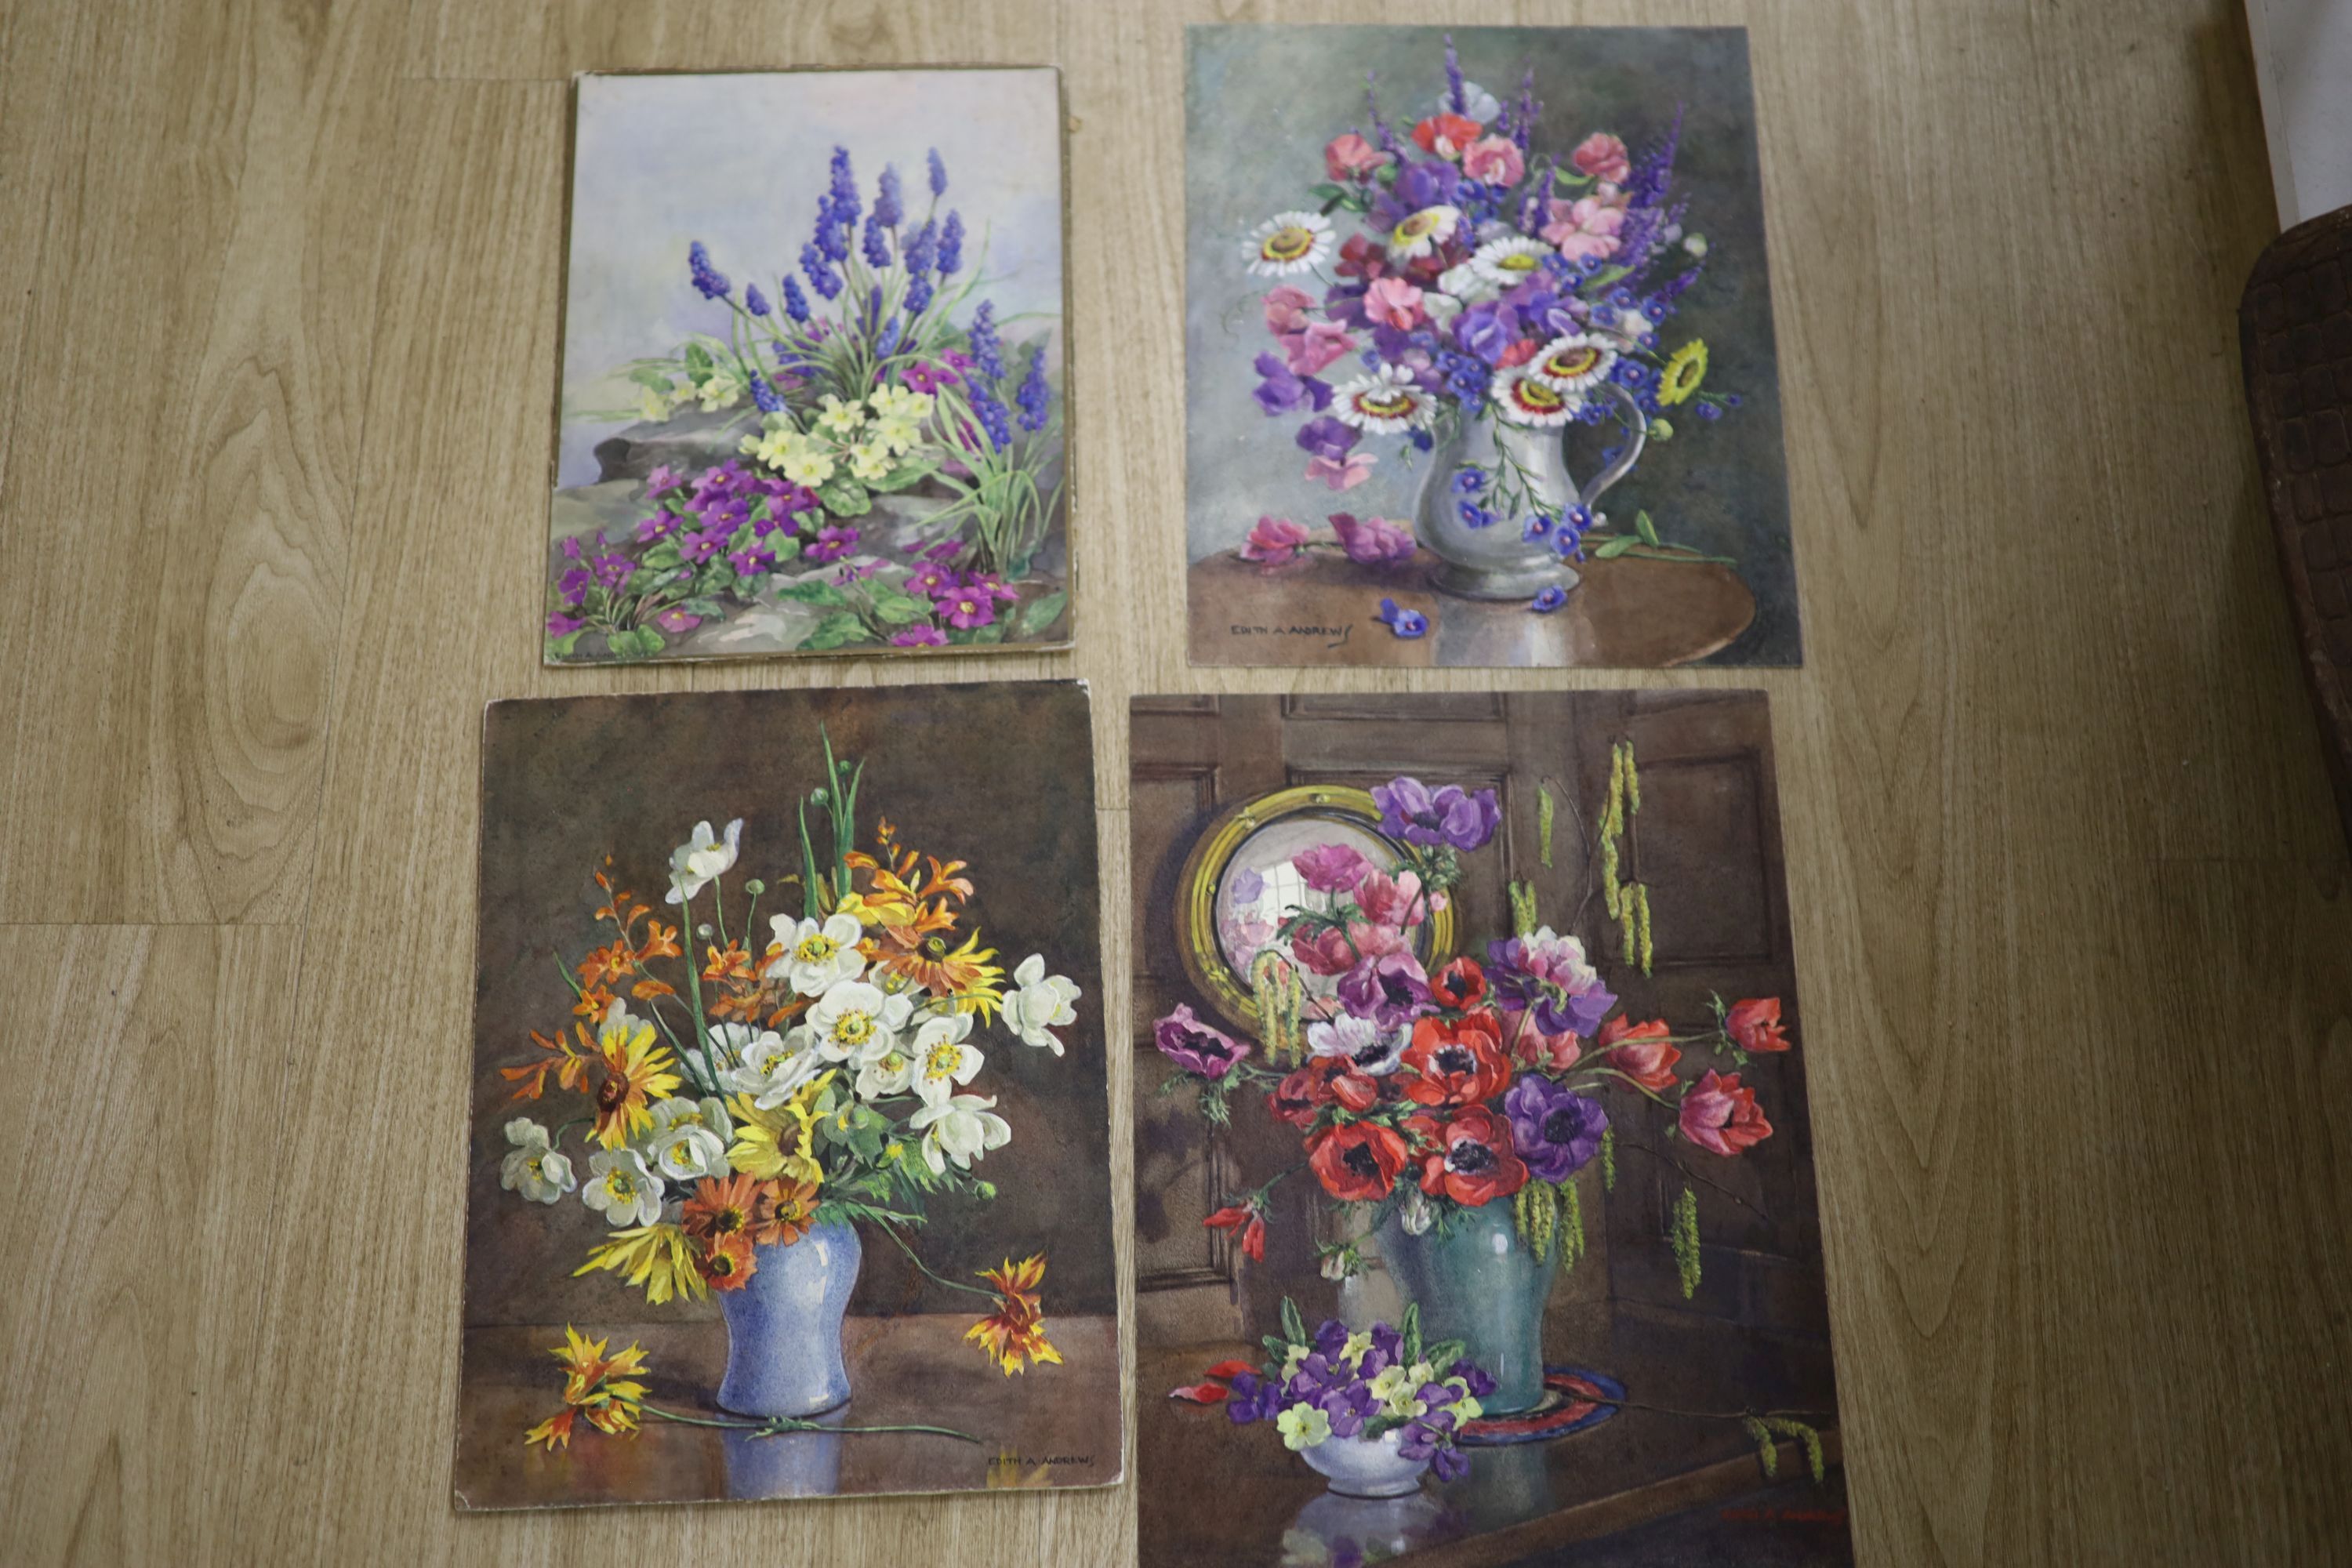 Edith Alice Andrews (1873-1958), 'In the Rock Garden' and three still life watercolours of flowers 44 x 32cm (largest)